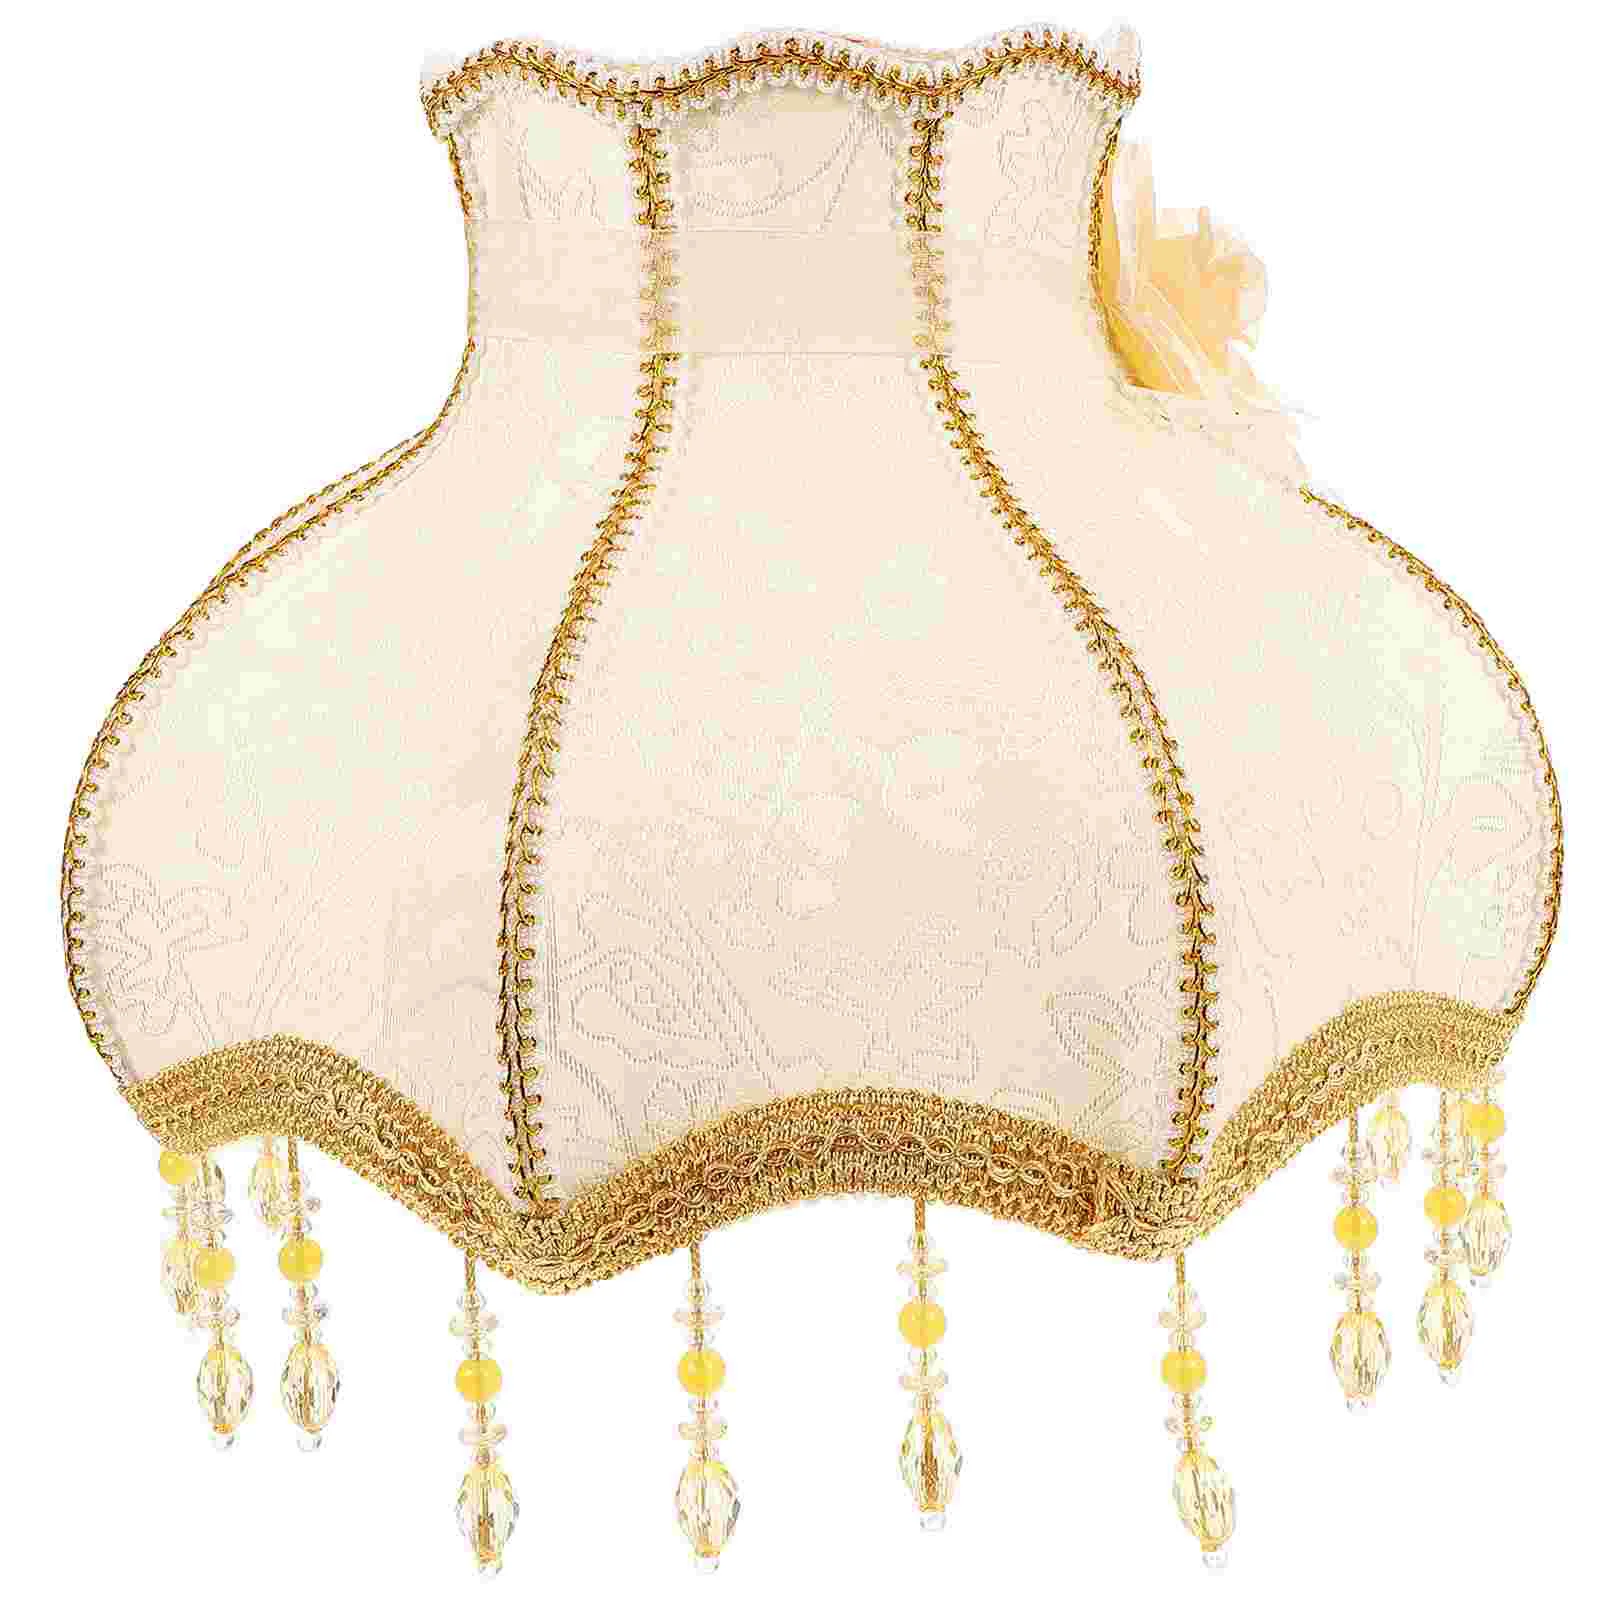 

European Style Lampshade Vintage Barrel Lampshade Retro Art Bead Lace Lampshade Scallop Dome Lamp Shade Living Room Bedroom E27